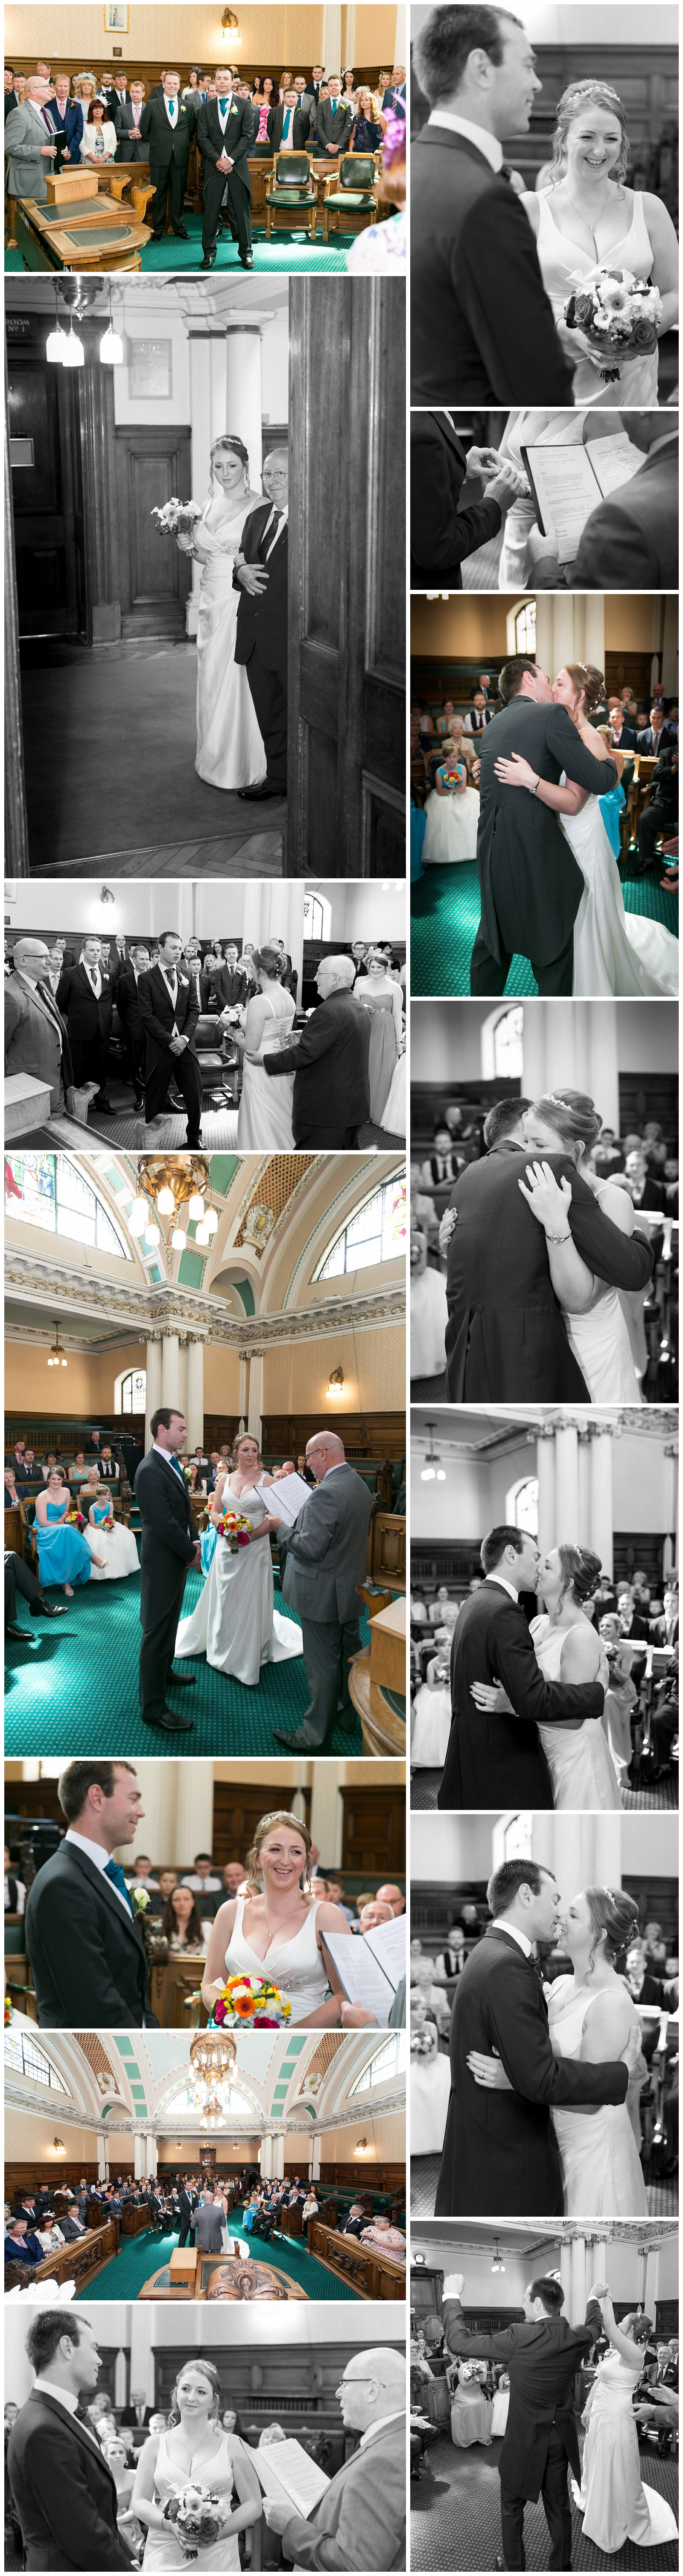 The wedding ceremony at Stockport Town Hall